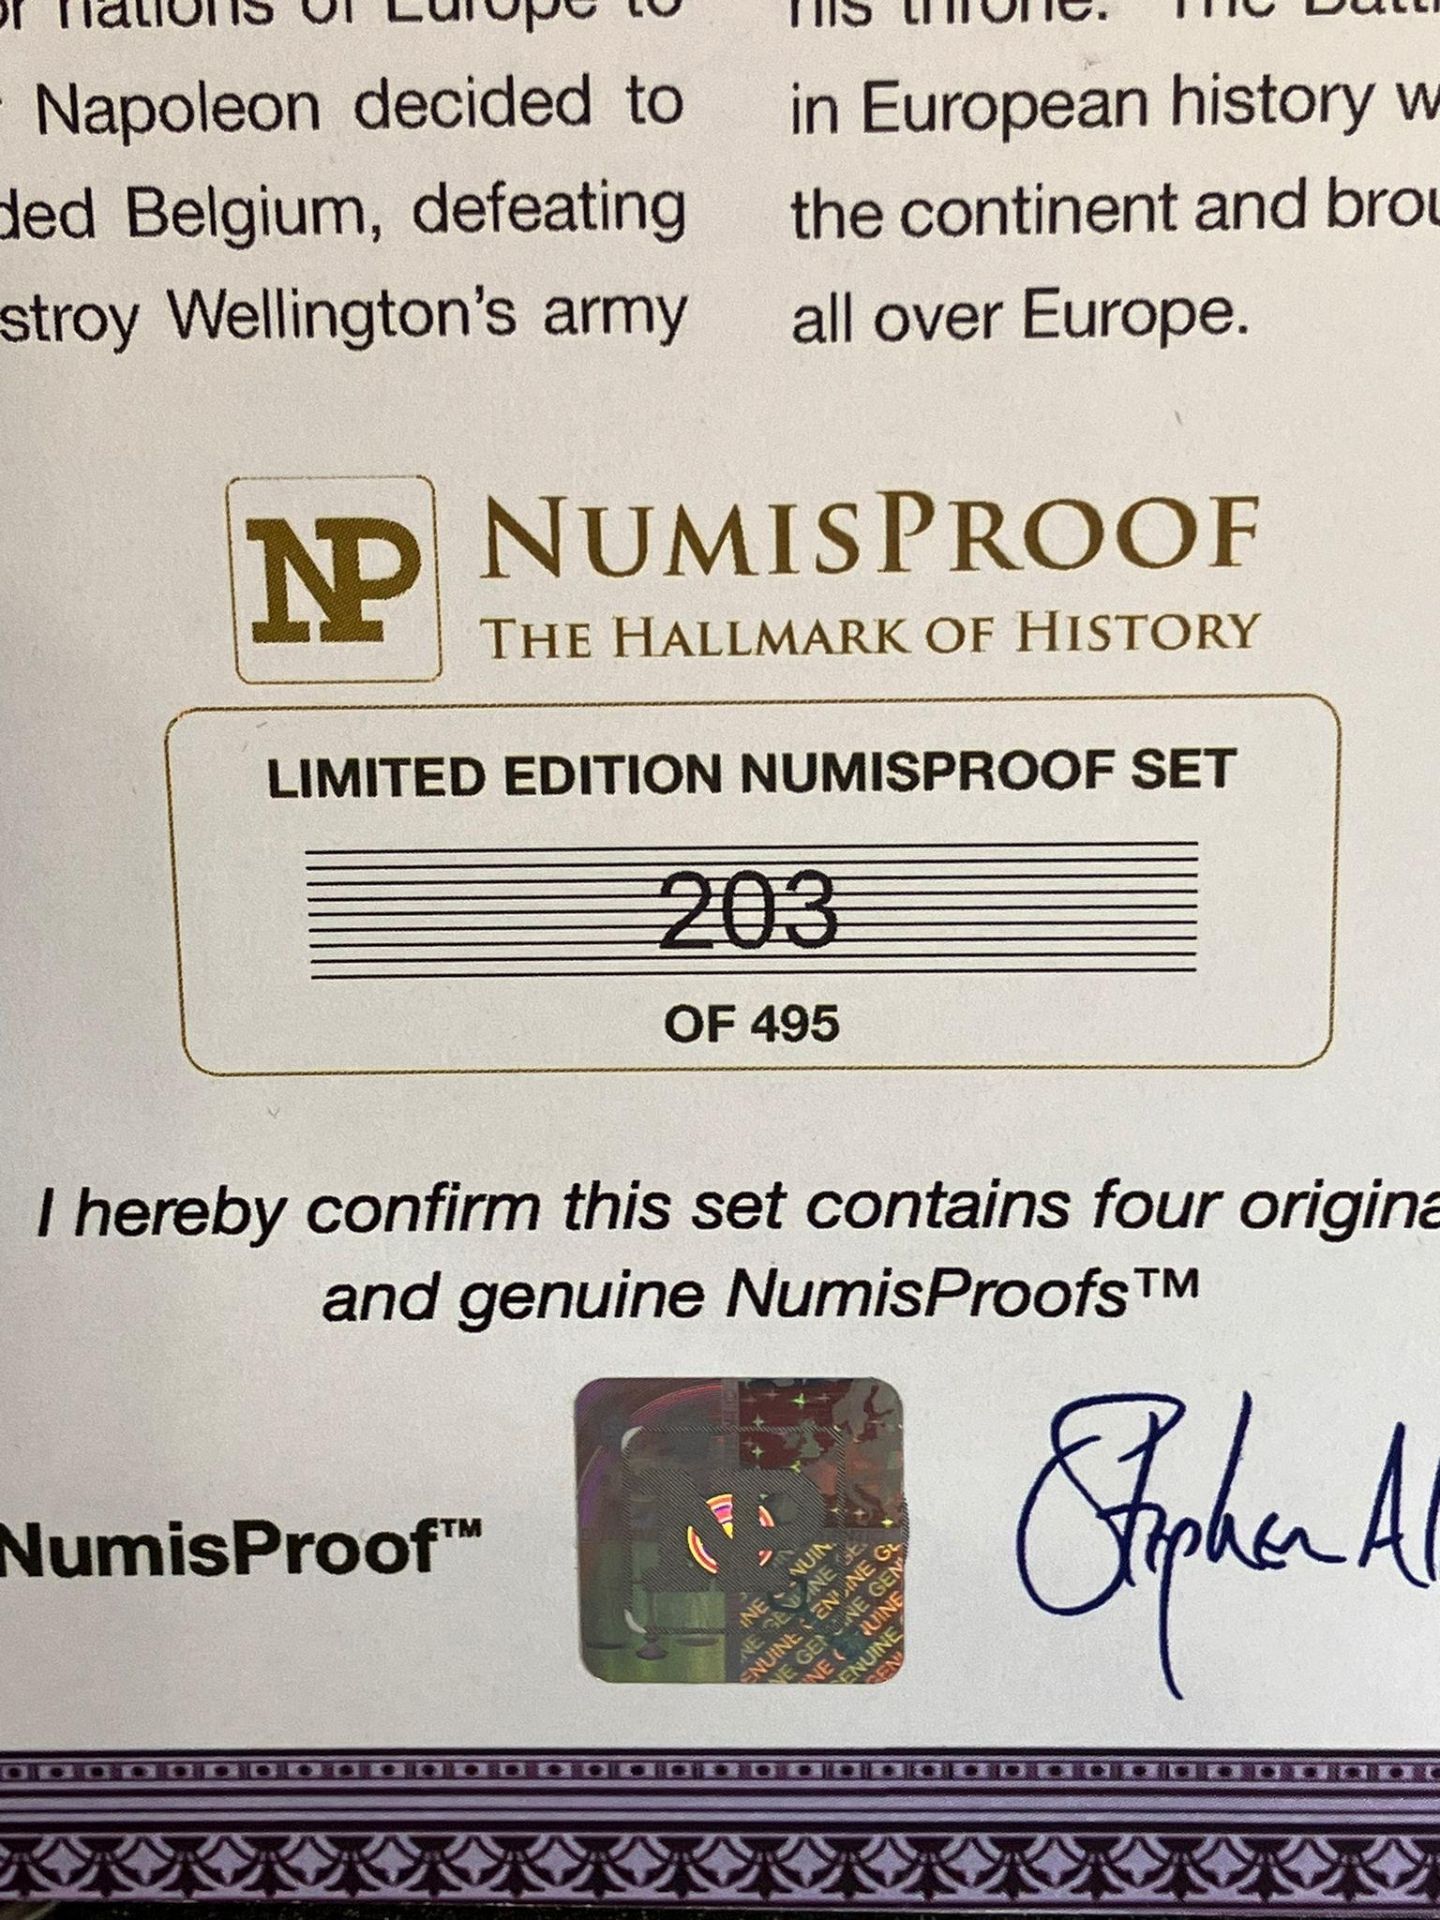 Rare Battle of Waterloo ‘NUMISPROOF’ commemorative set. Consisting 4 x large GOLD PLATED Numisproofs - Image 10 of 17